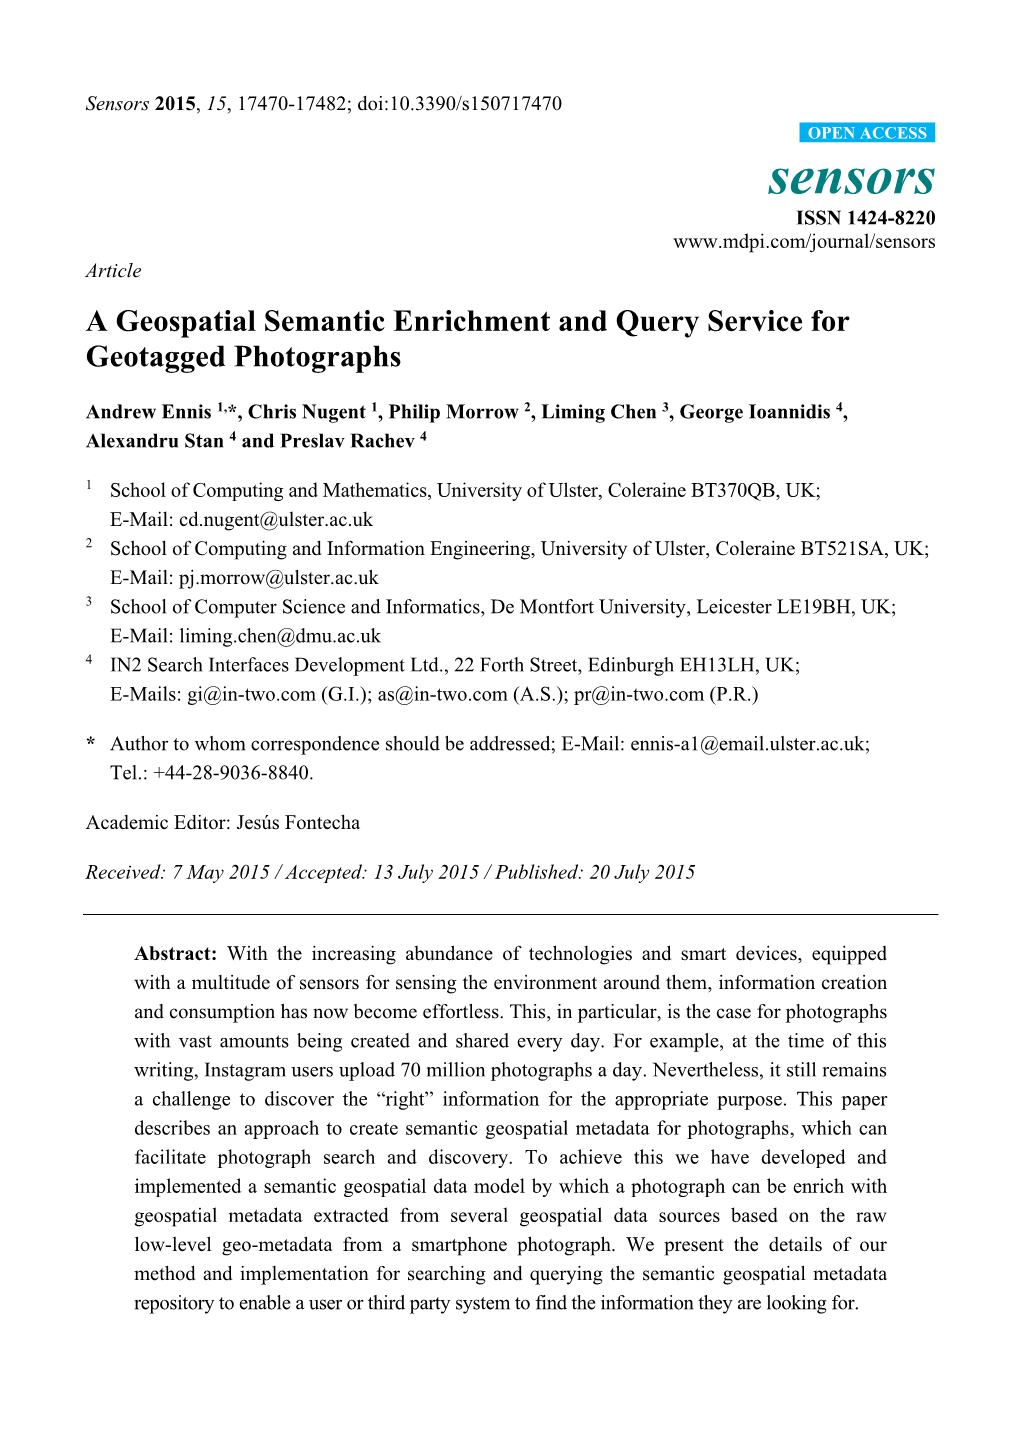 A Geospatial Semantic Enrichment and Query Service for Geotagged Photographs